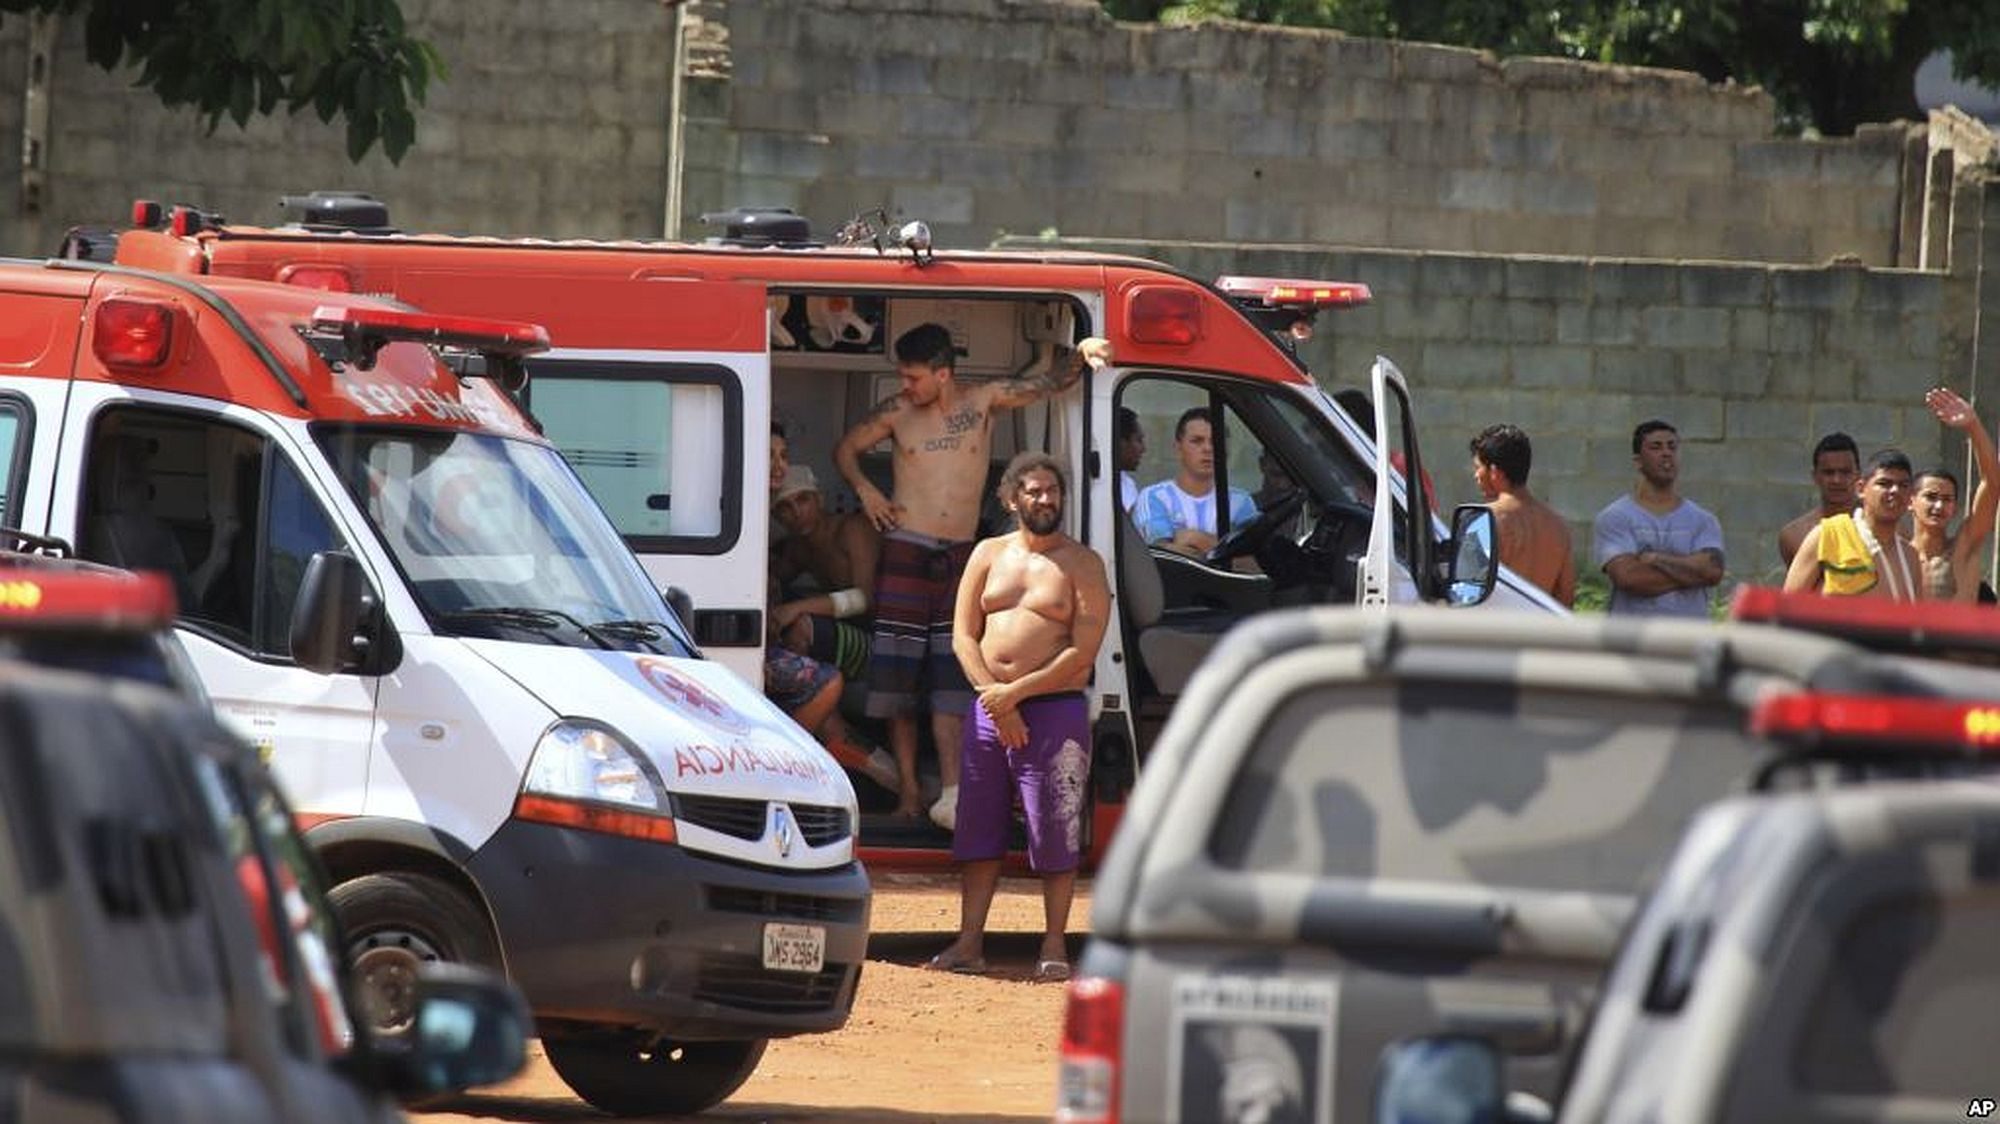 Prisoners get medical after a rebellion at the Colônia Agroindustrial prison in Goiânia